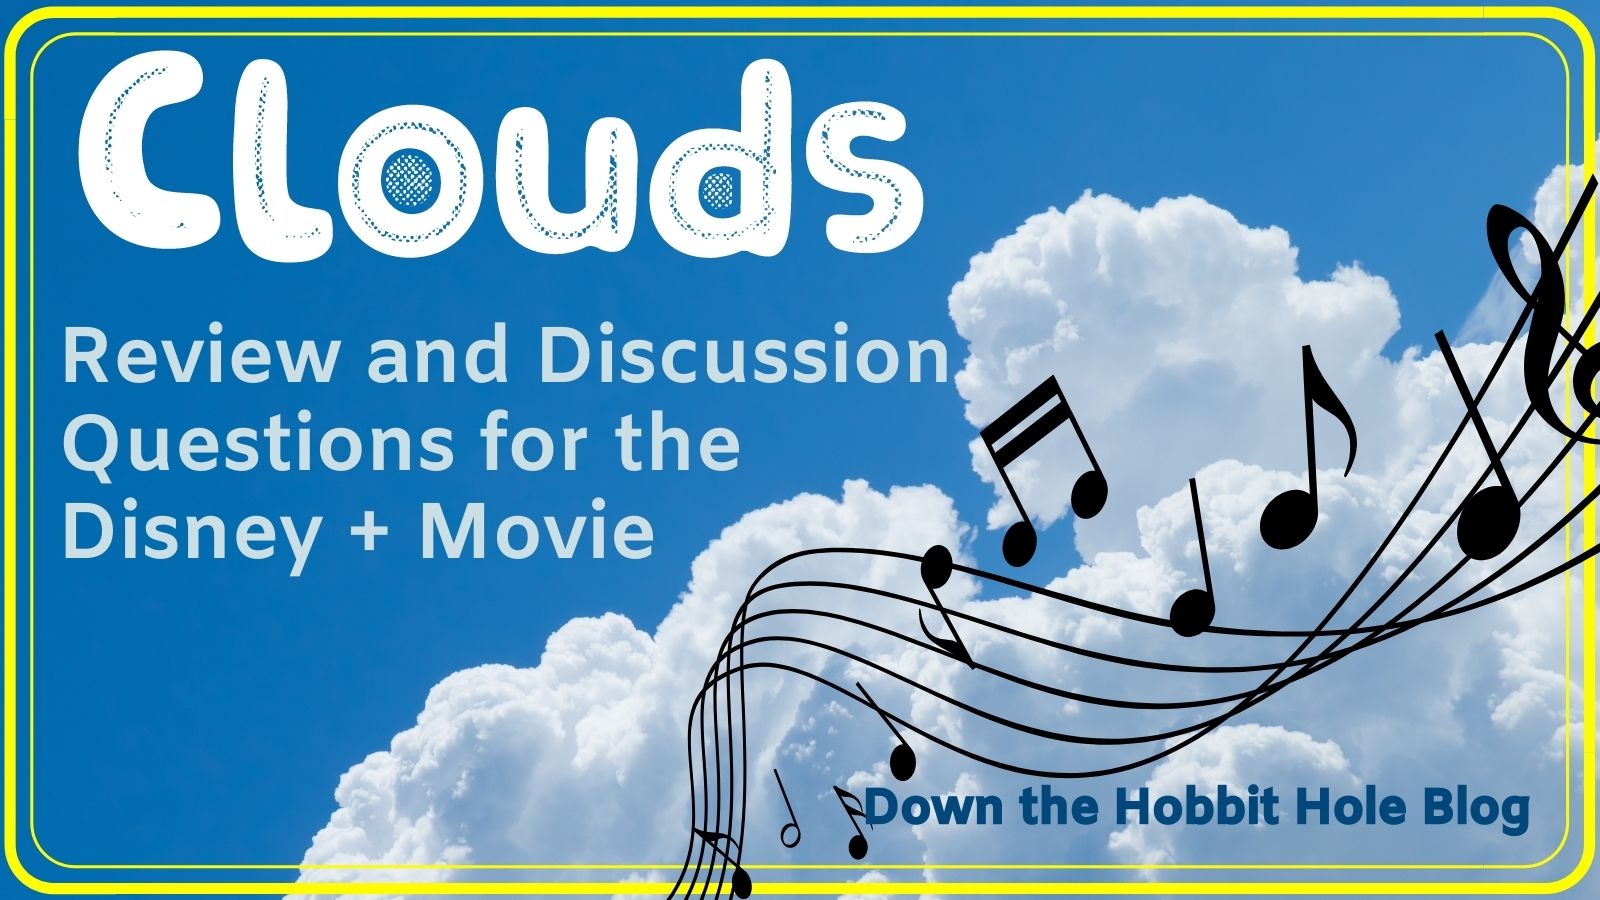 clouds movie review essay